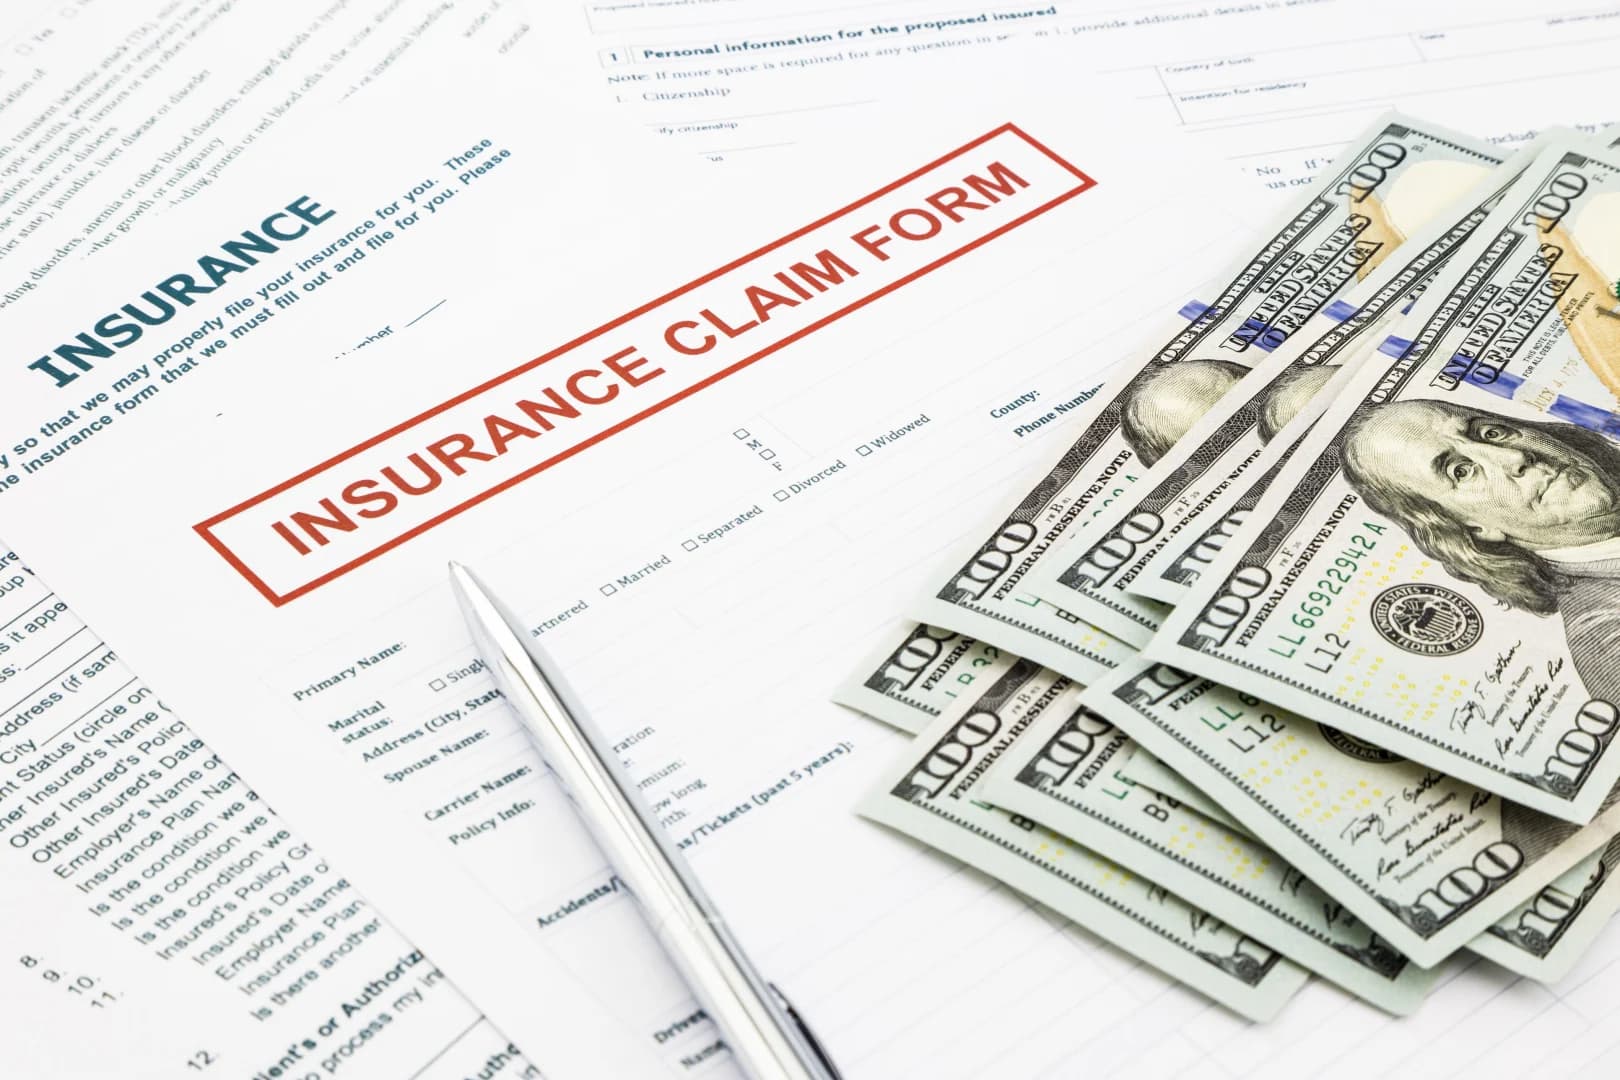 Death-benefit claims are jumping, but we can’t say why